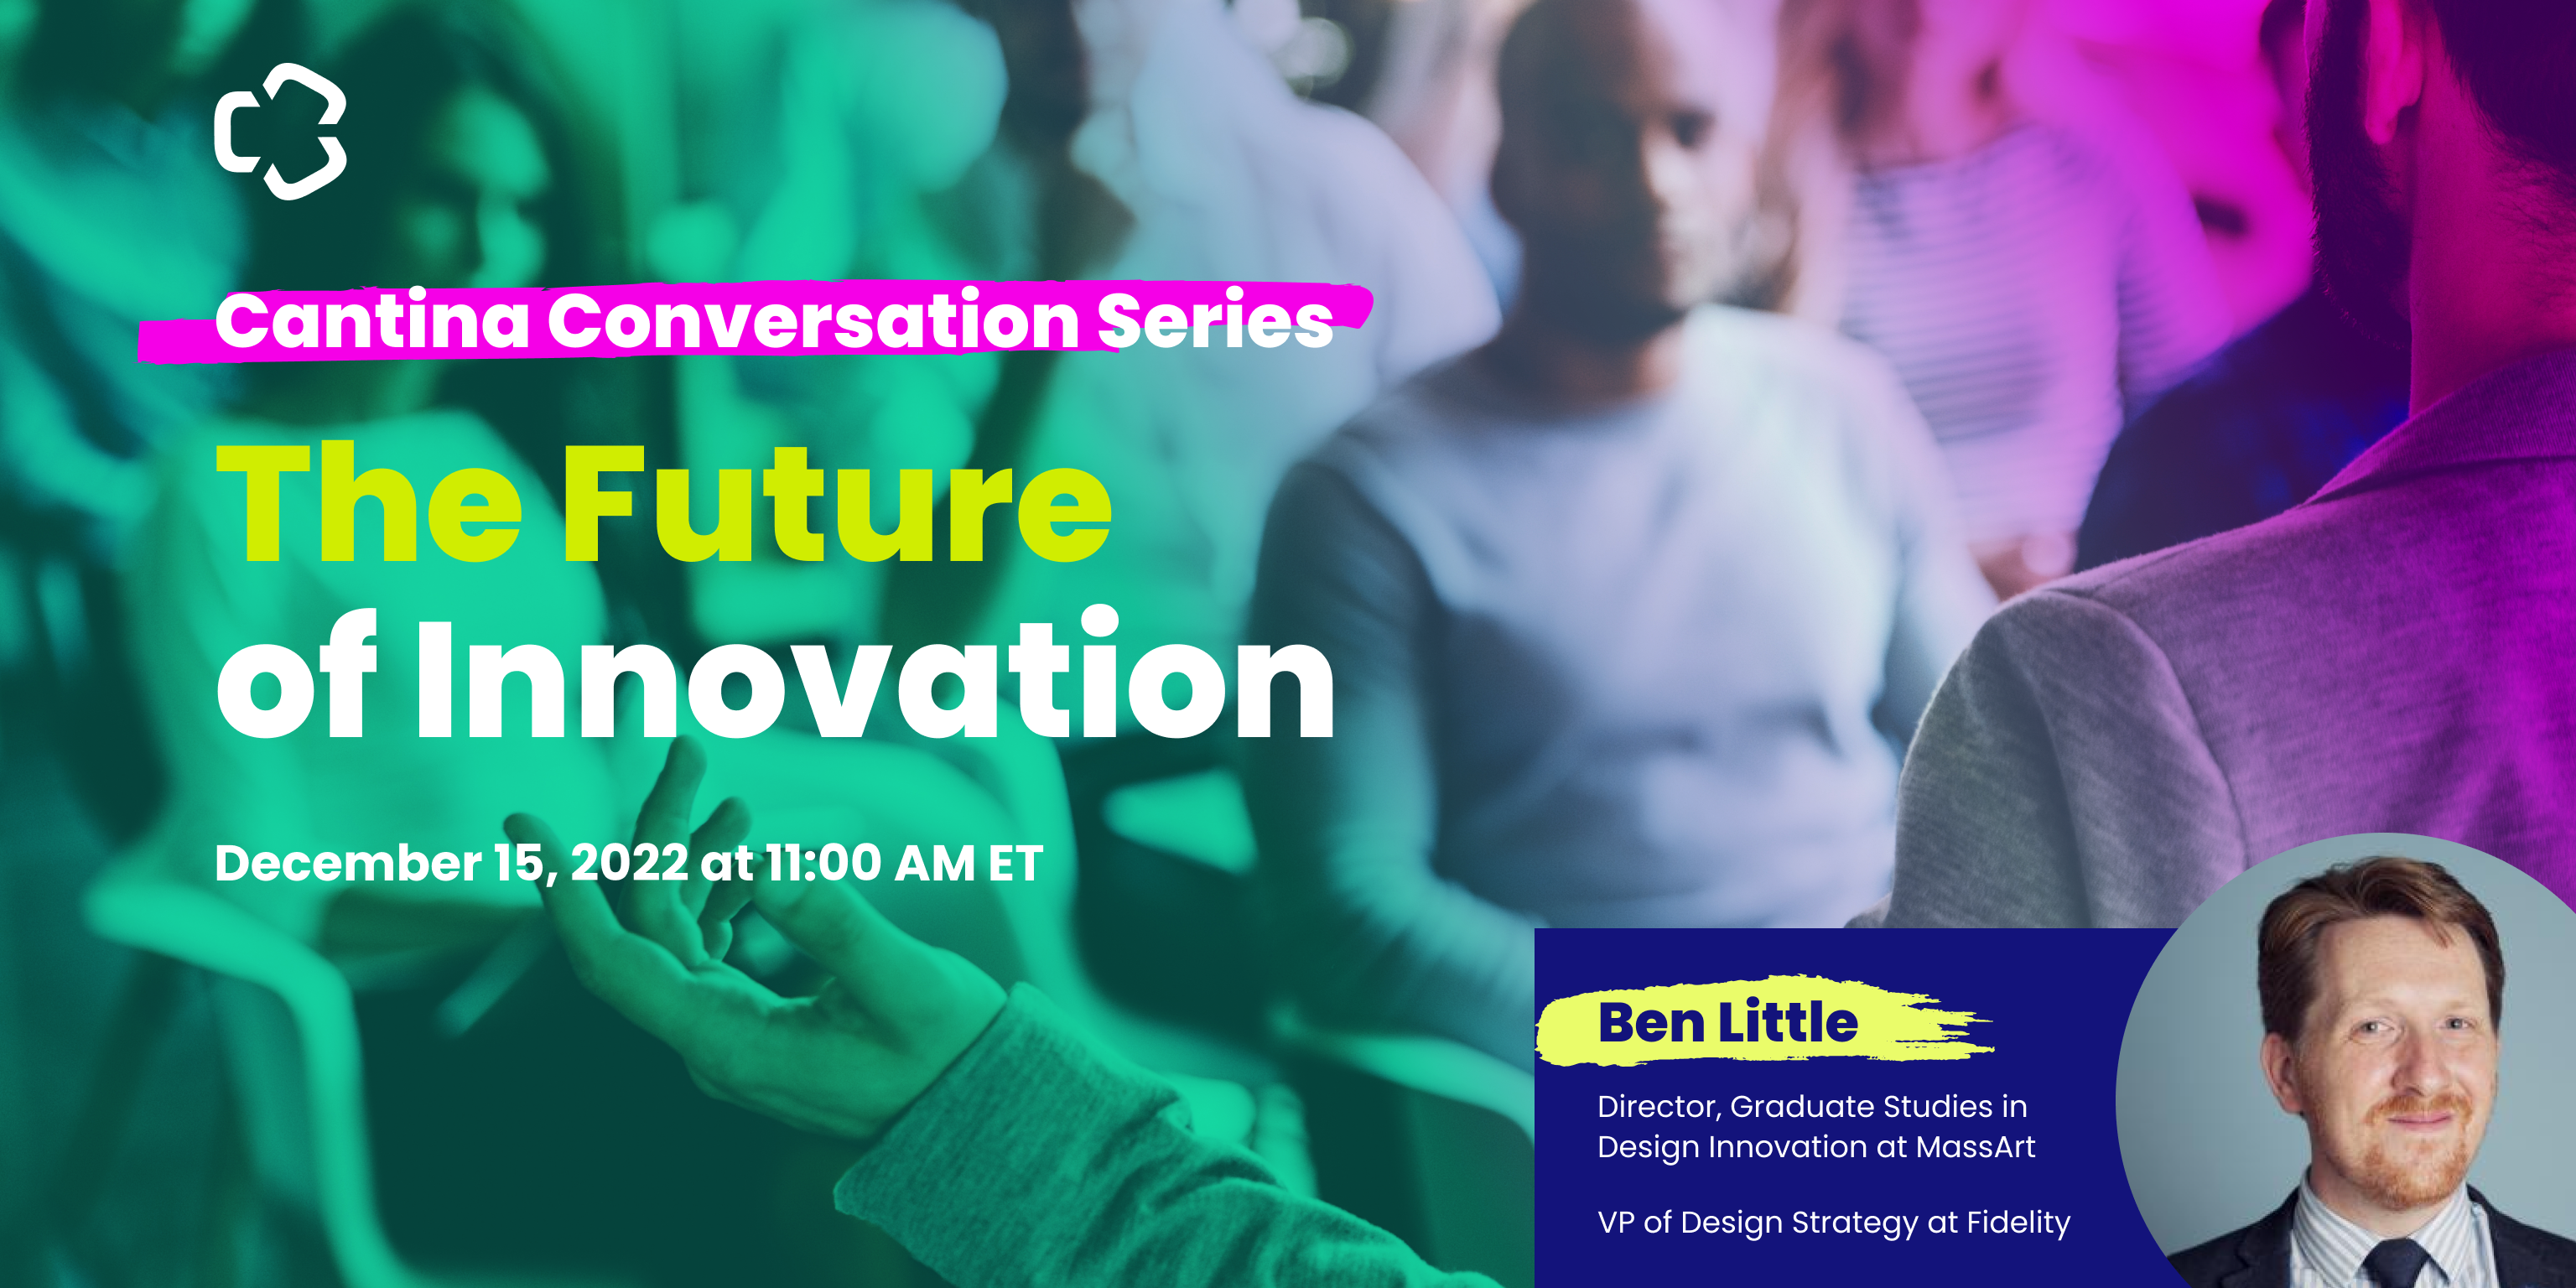 A Conversation with Ben Little on the Future of Innovation